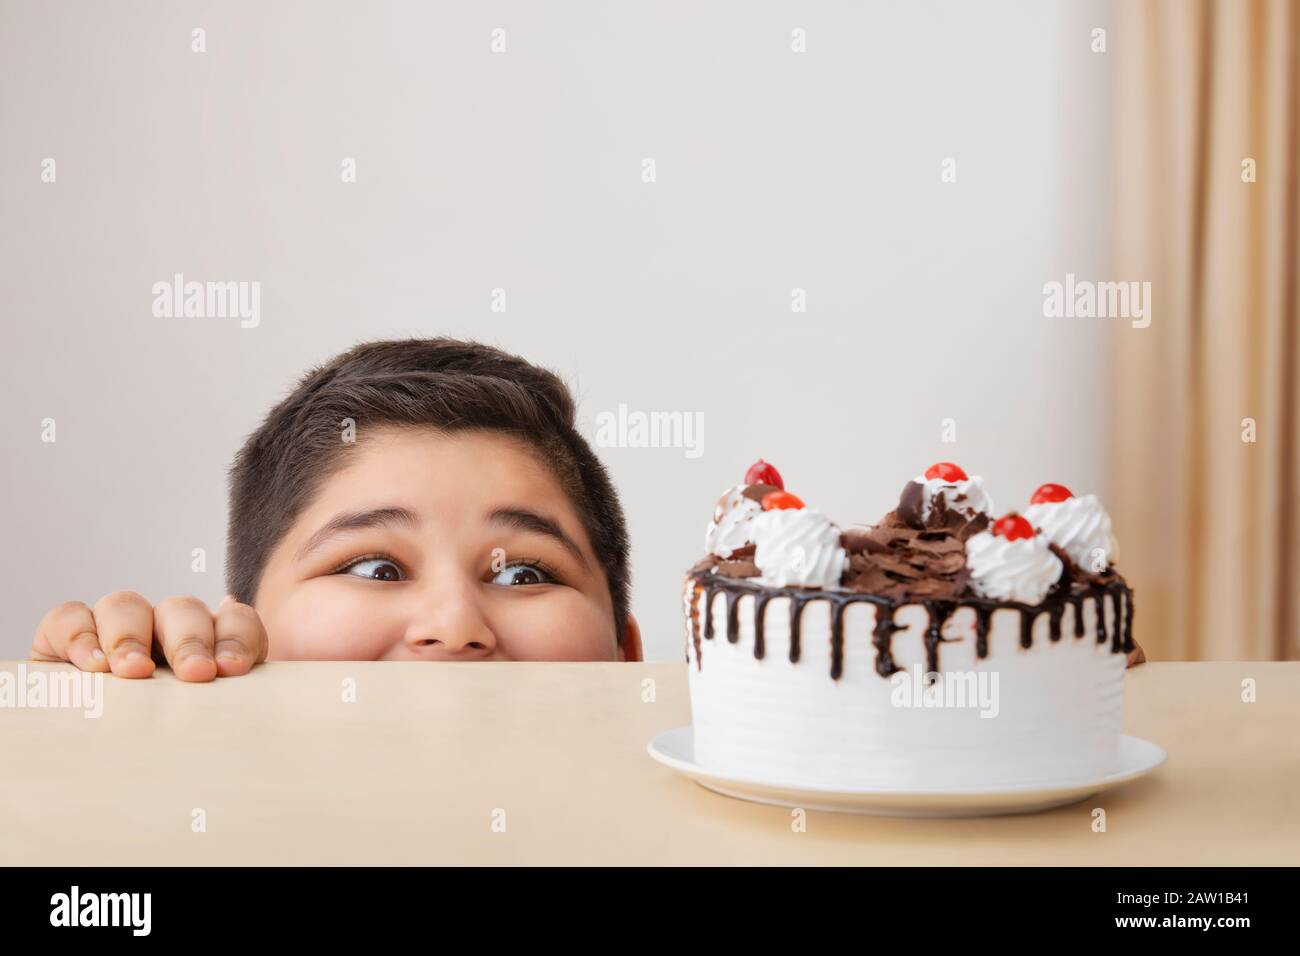 Young boy looking hungrily at a cake kept on the table. (Obesity) Stock Photo